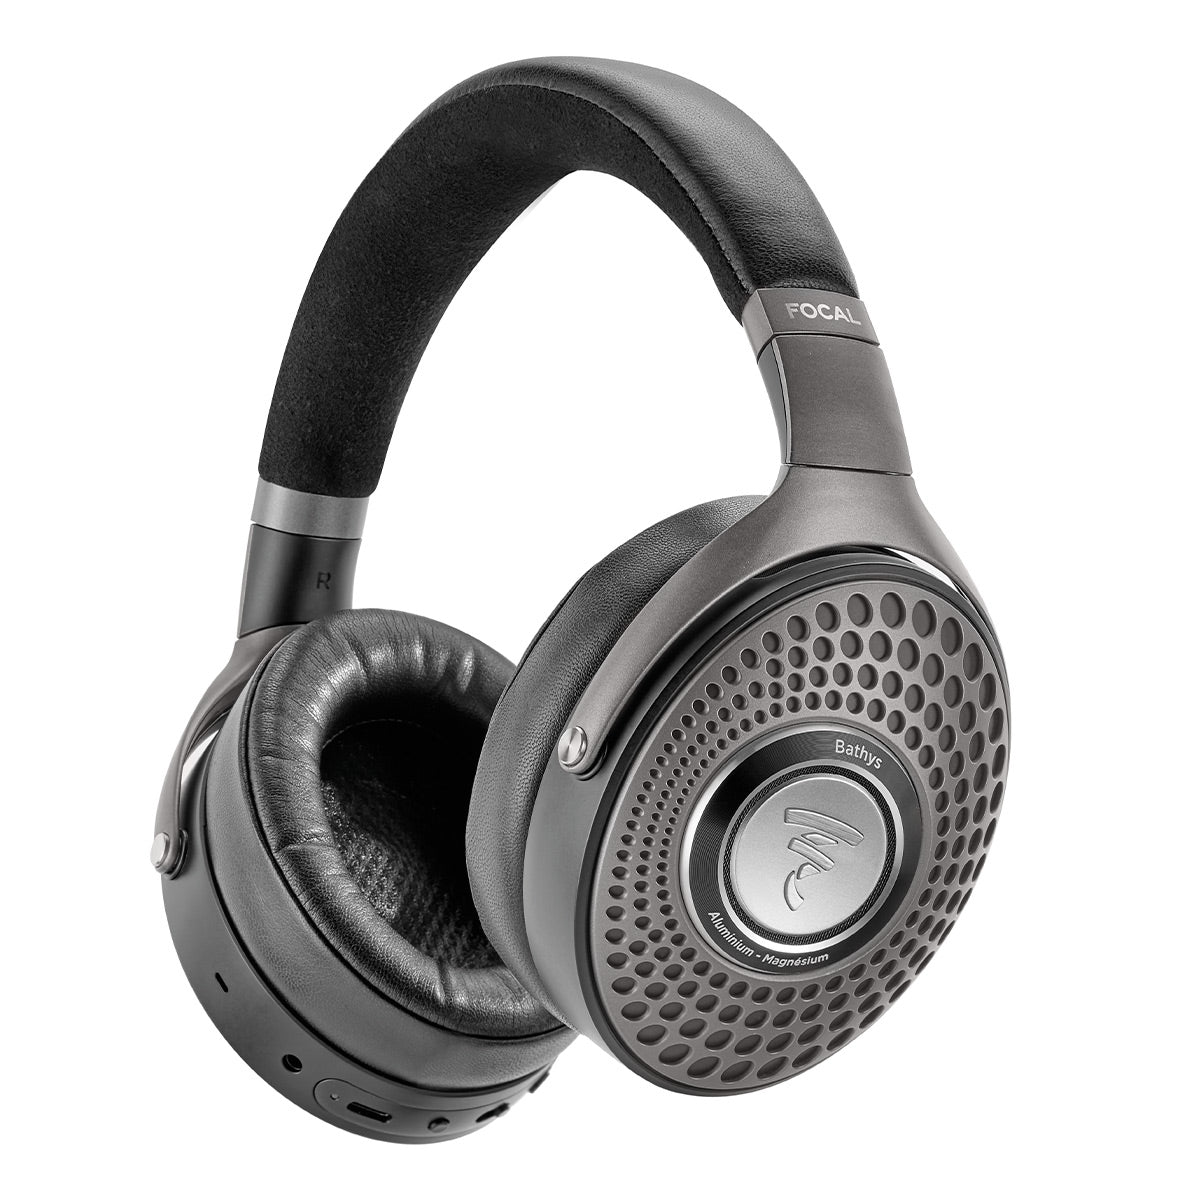 Focal Bathys Wireless Active Noise Cancelling Bluetooth Over-Ear Headphones  with Mic/Remote, Grey